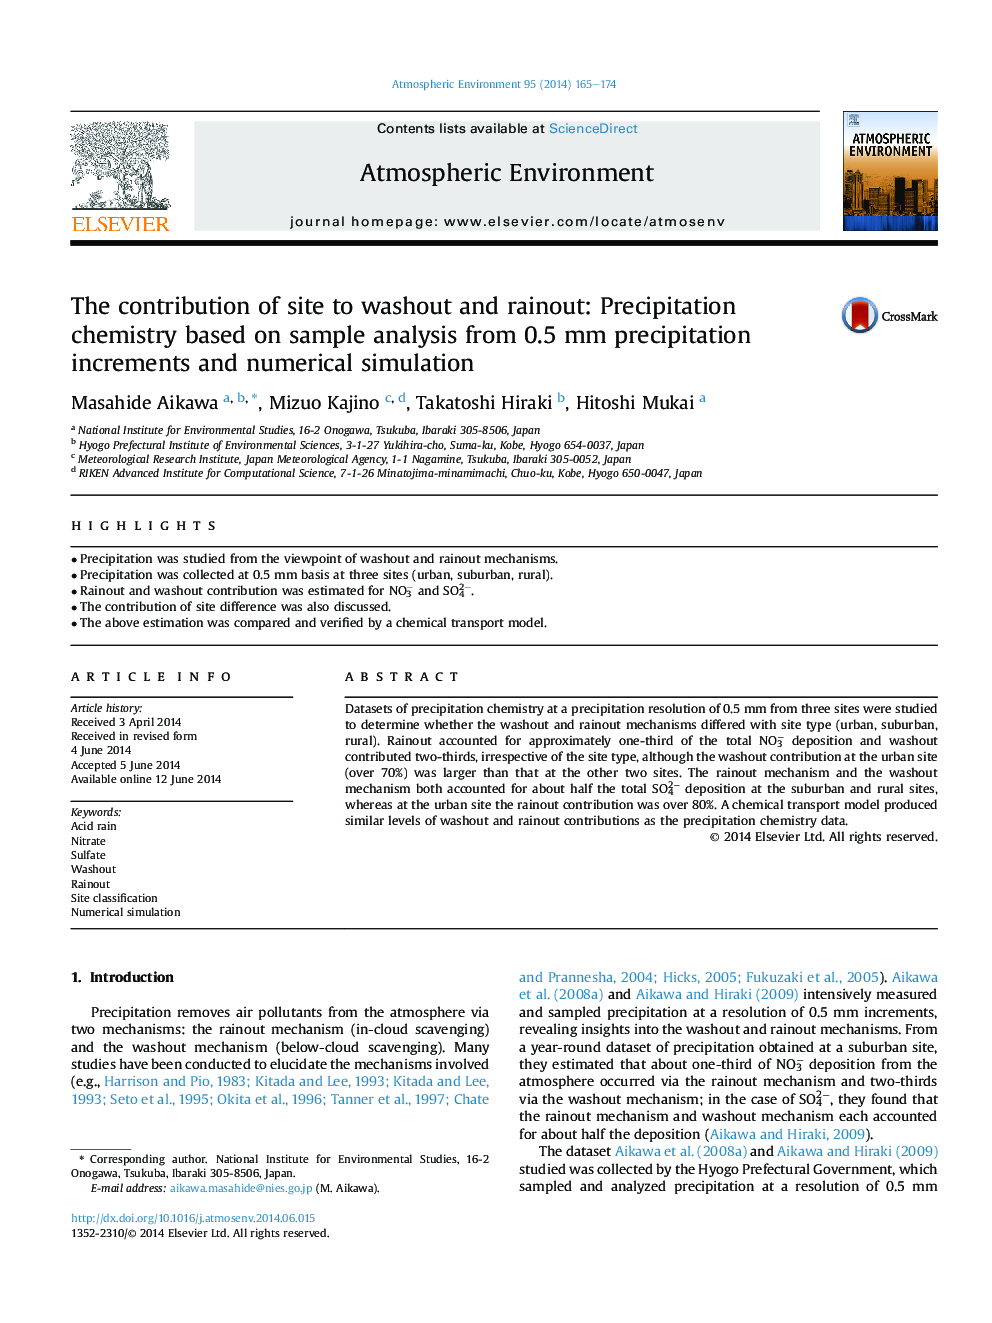 The contribution of site to washout and rainout: Precipitation chemistry based on sample analysis from 0.5Â mm precipitation increments and numerical simulation